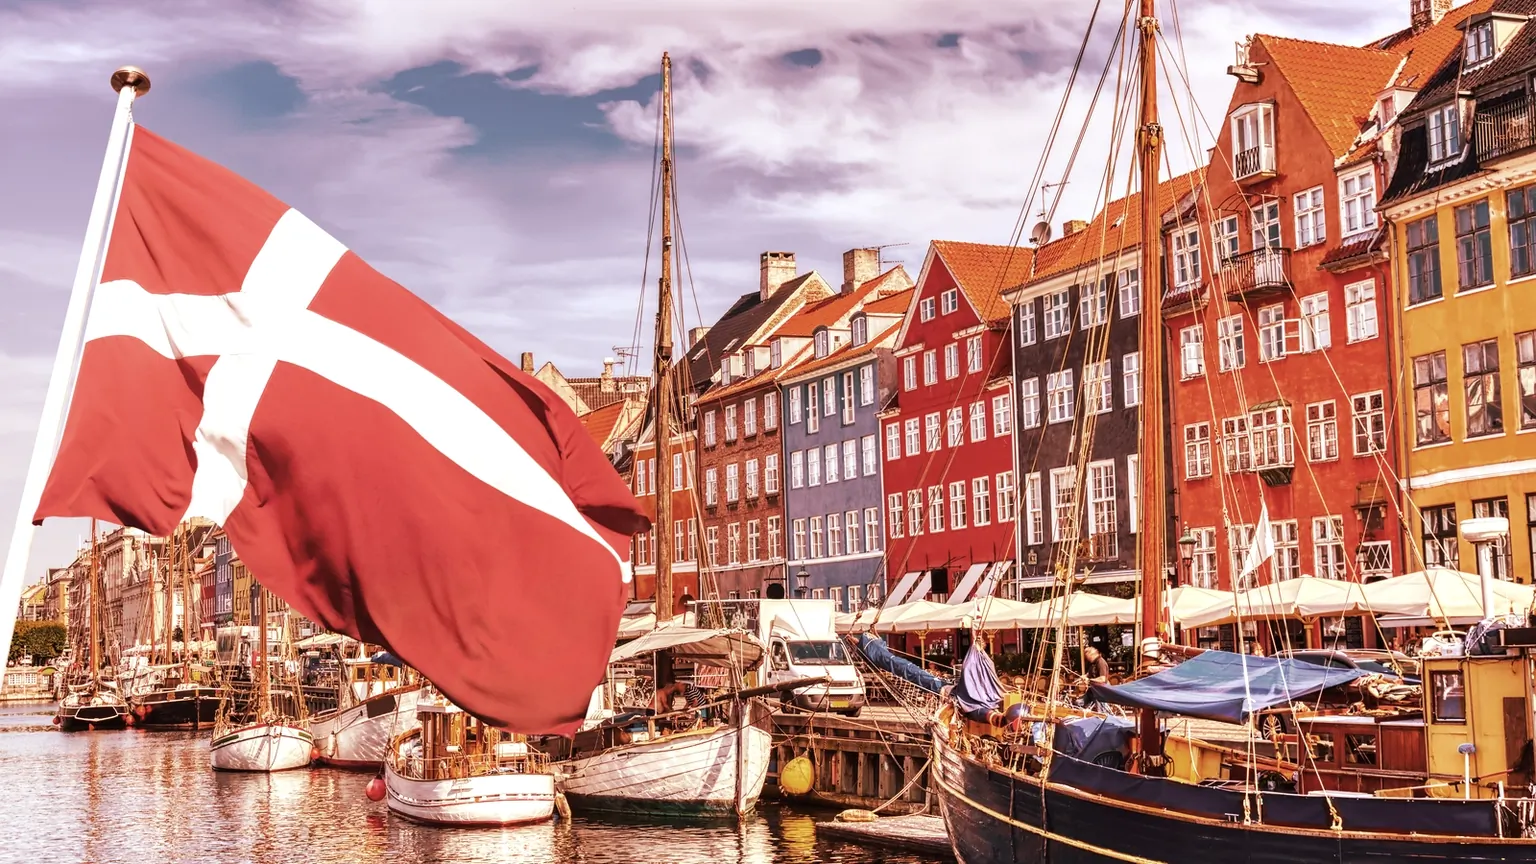 Bitcoin is considered a currency nor legal tender in Denmark. Image: Shutterstock